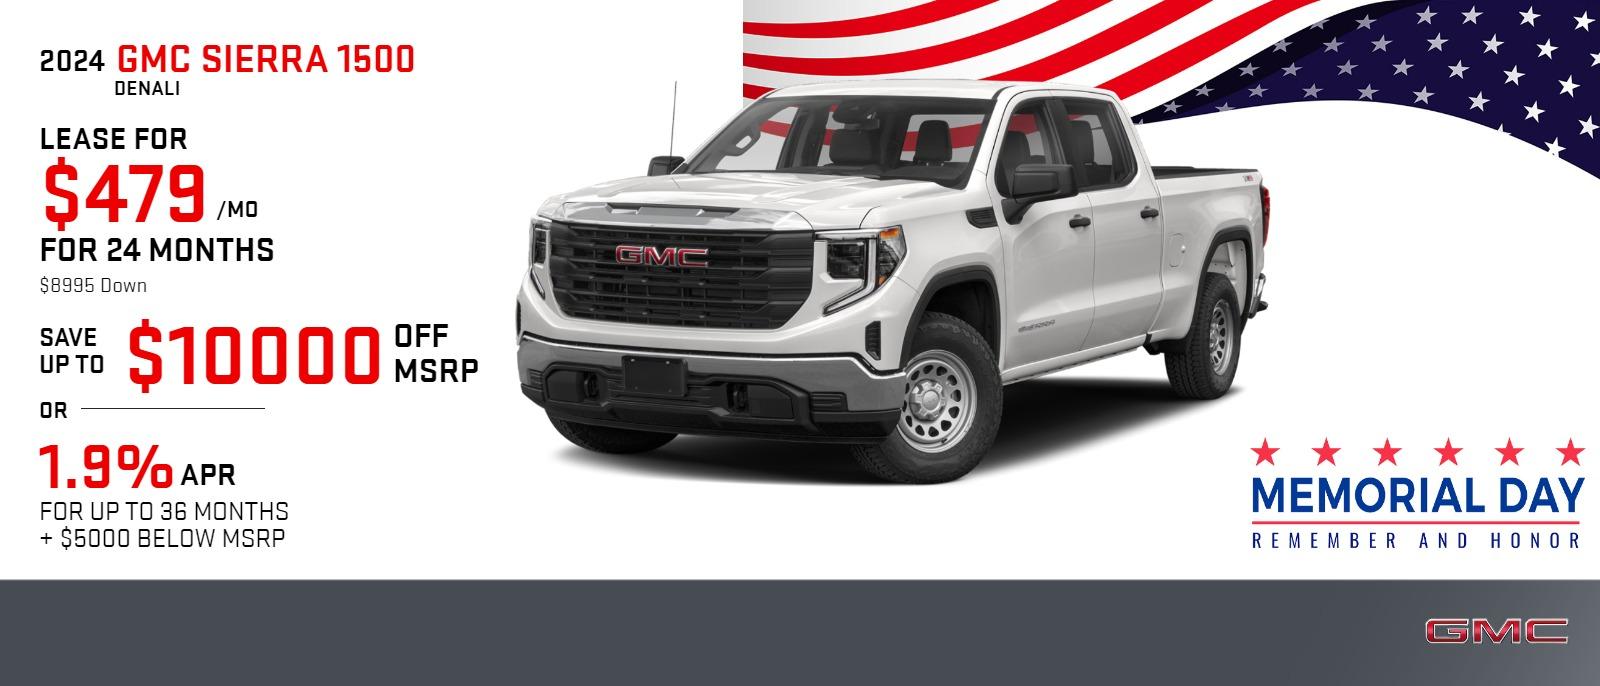 2024 GMC SIERRA 1500 DENALI 
$479 | 24 MONTHS | $8995
SAVE UP TO $10000 OFF MSRP
1.9% APR FOR UP TO 36 MONTHS + $5000 BELOW MSRP